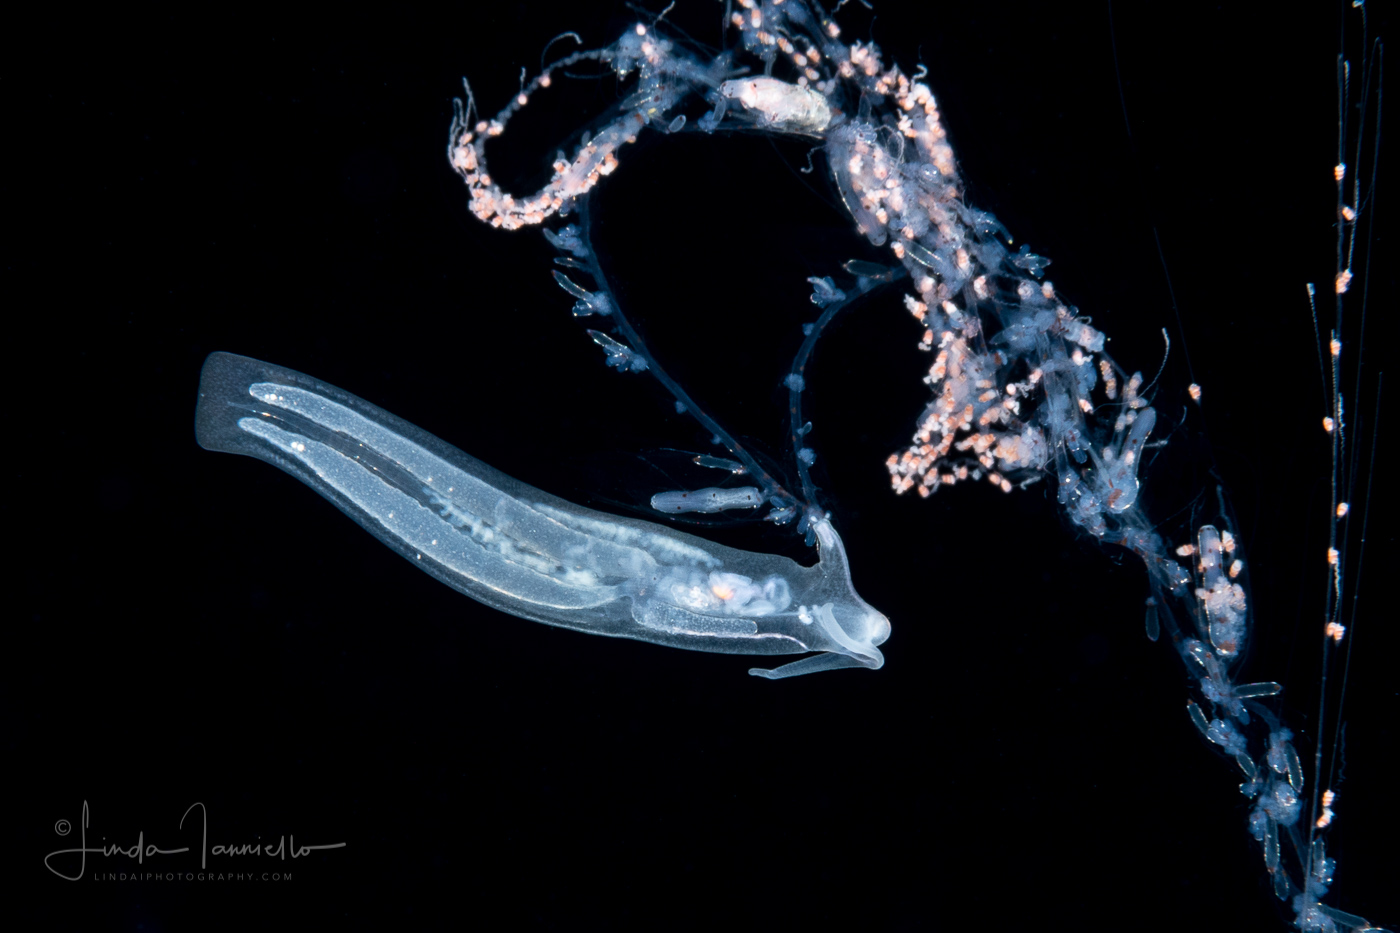 Cephalopyge trematoides - Pelagic Nudibranch - preying on a siphonophore